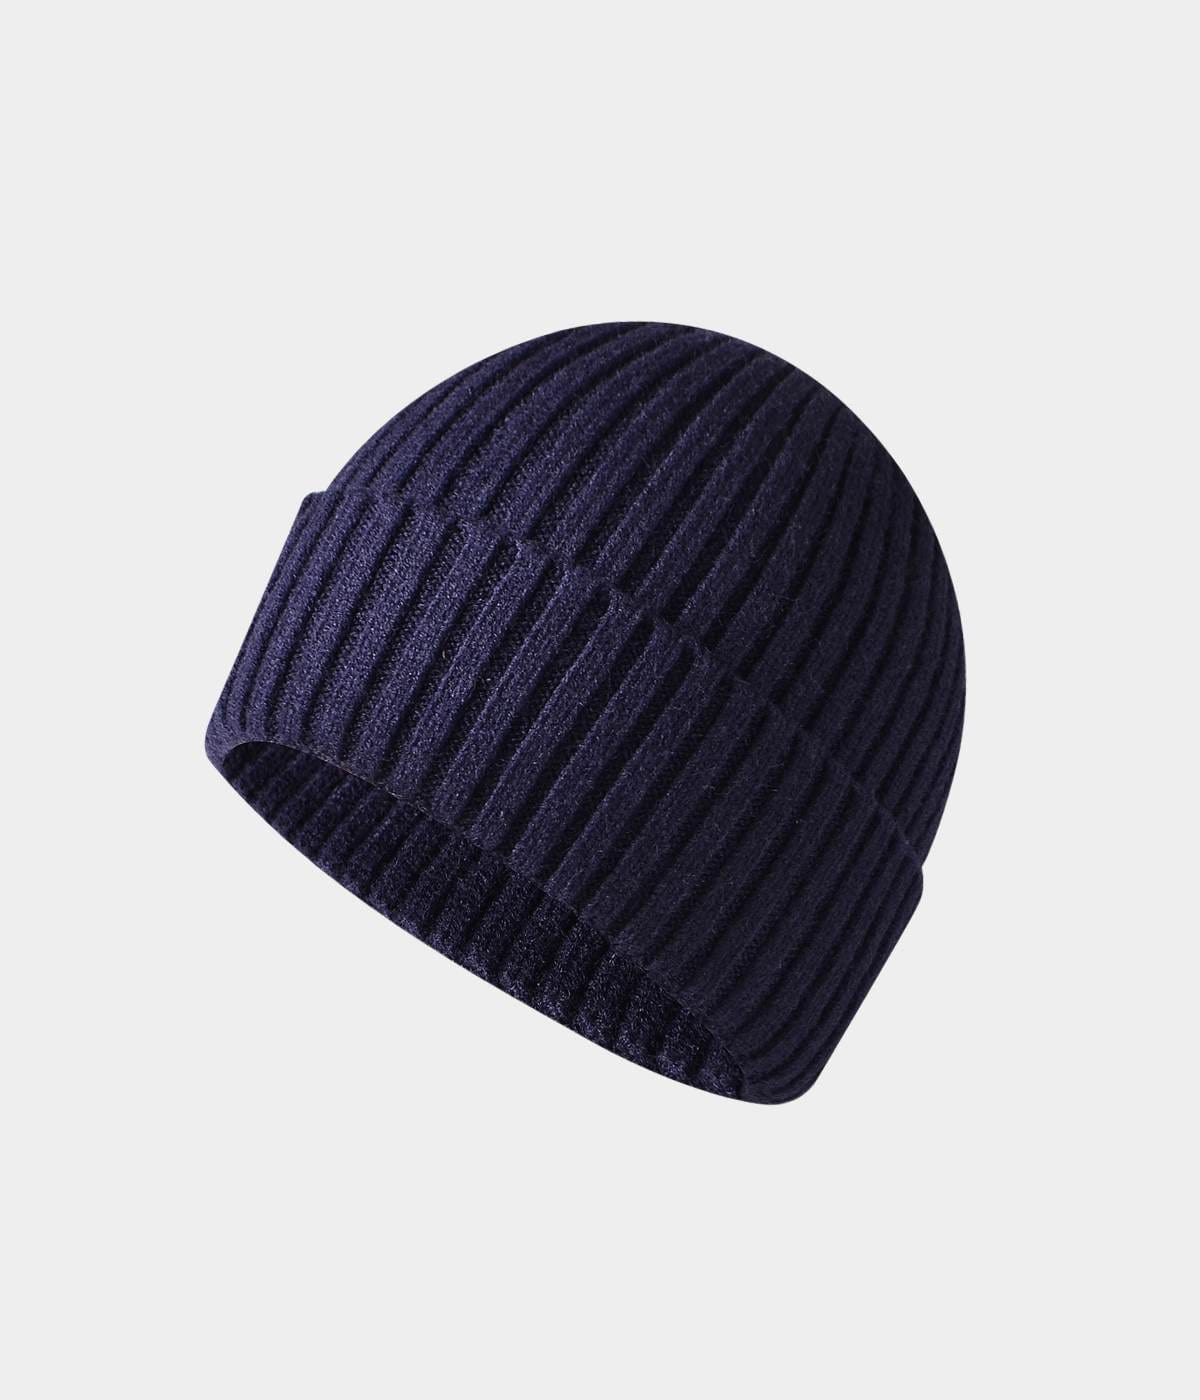 CABLE BEANIE.